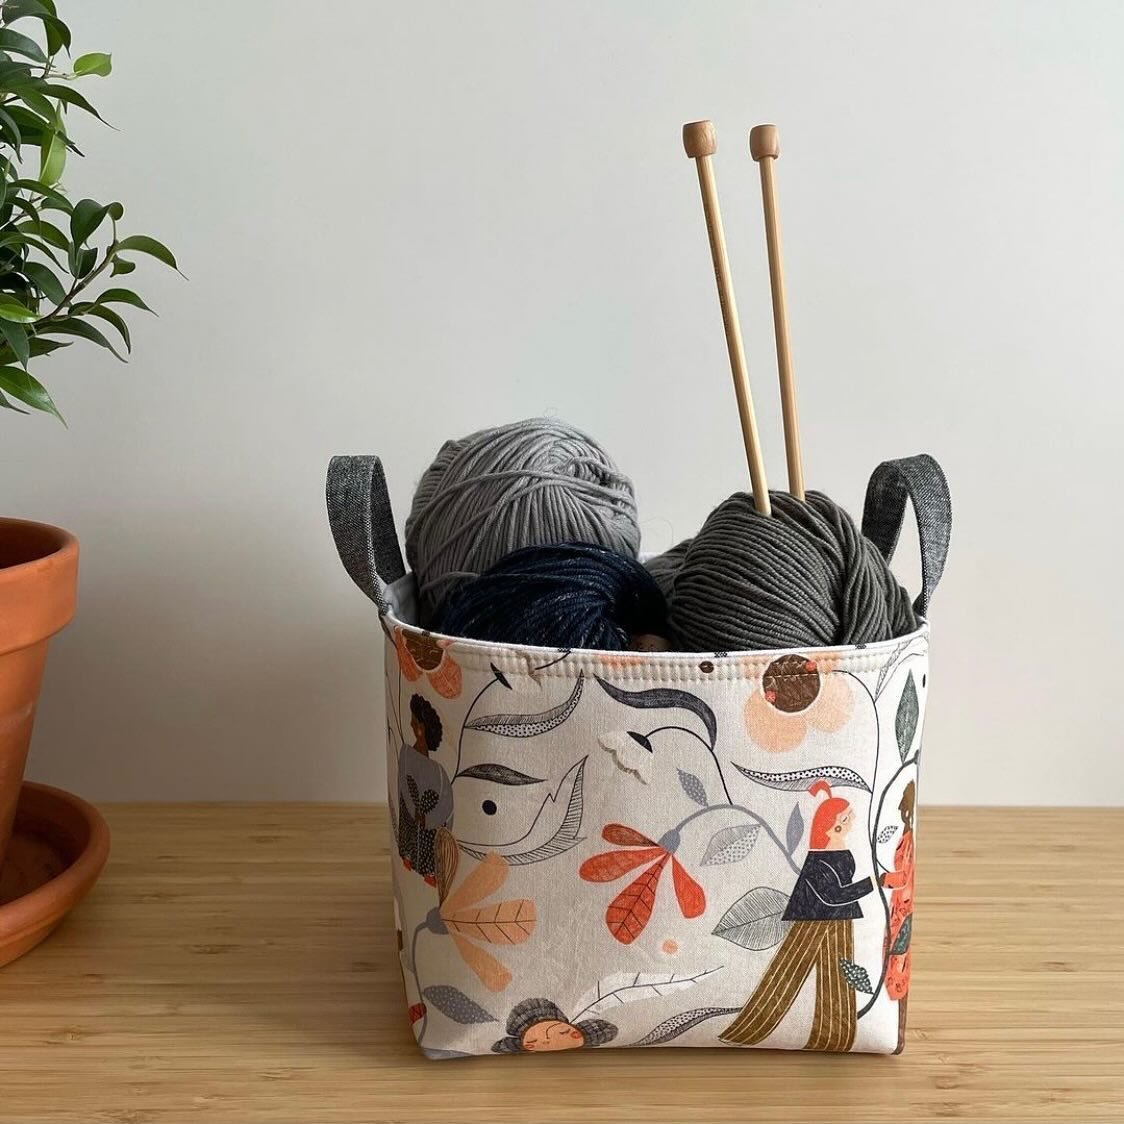 Lagom Storage Bin, medium size ❤️.

A perfect project bag, an organizer, or a gift basket. One of my most favorite quick little projects to sew.

Find the pattern (in five sizes) in my shop, link is in my profile.

Happy Monday, everyone!

#lagomstor